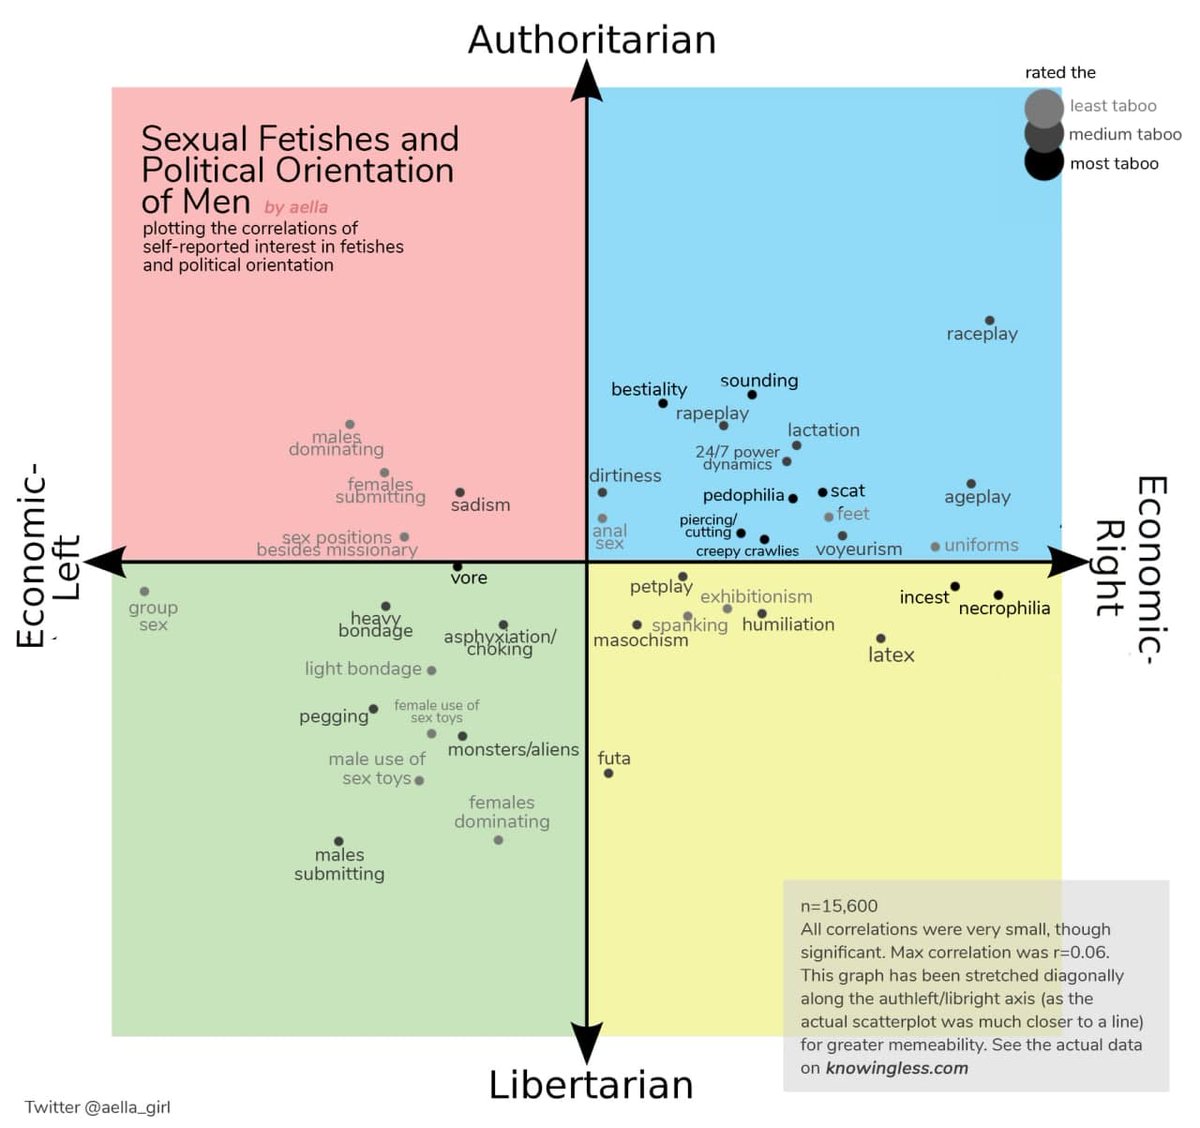 Sexual fetishes on the political compass, men and women. Total sample size was over 19,000!